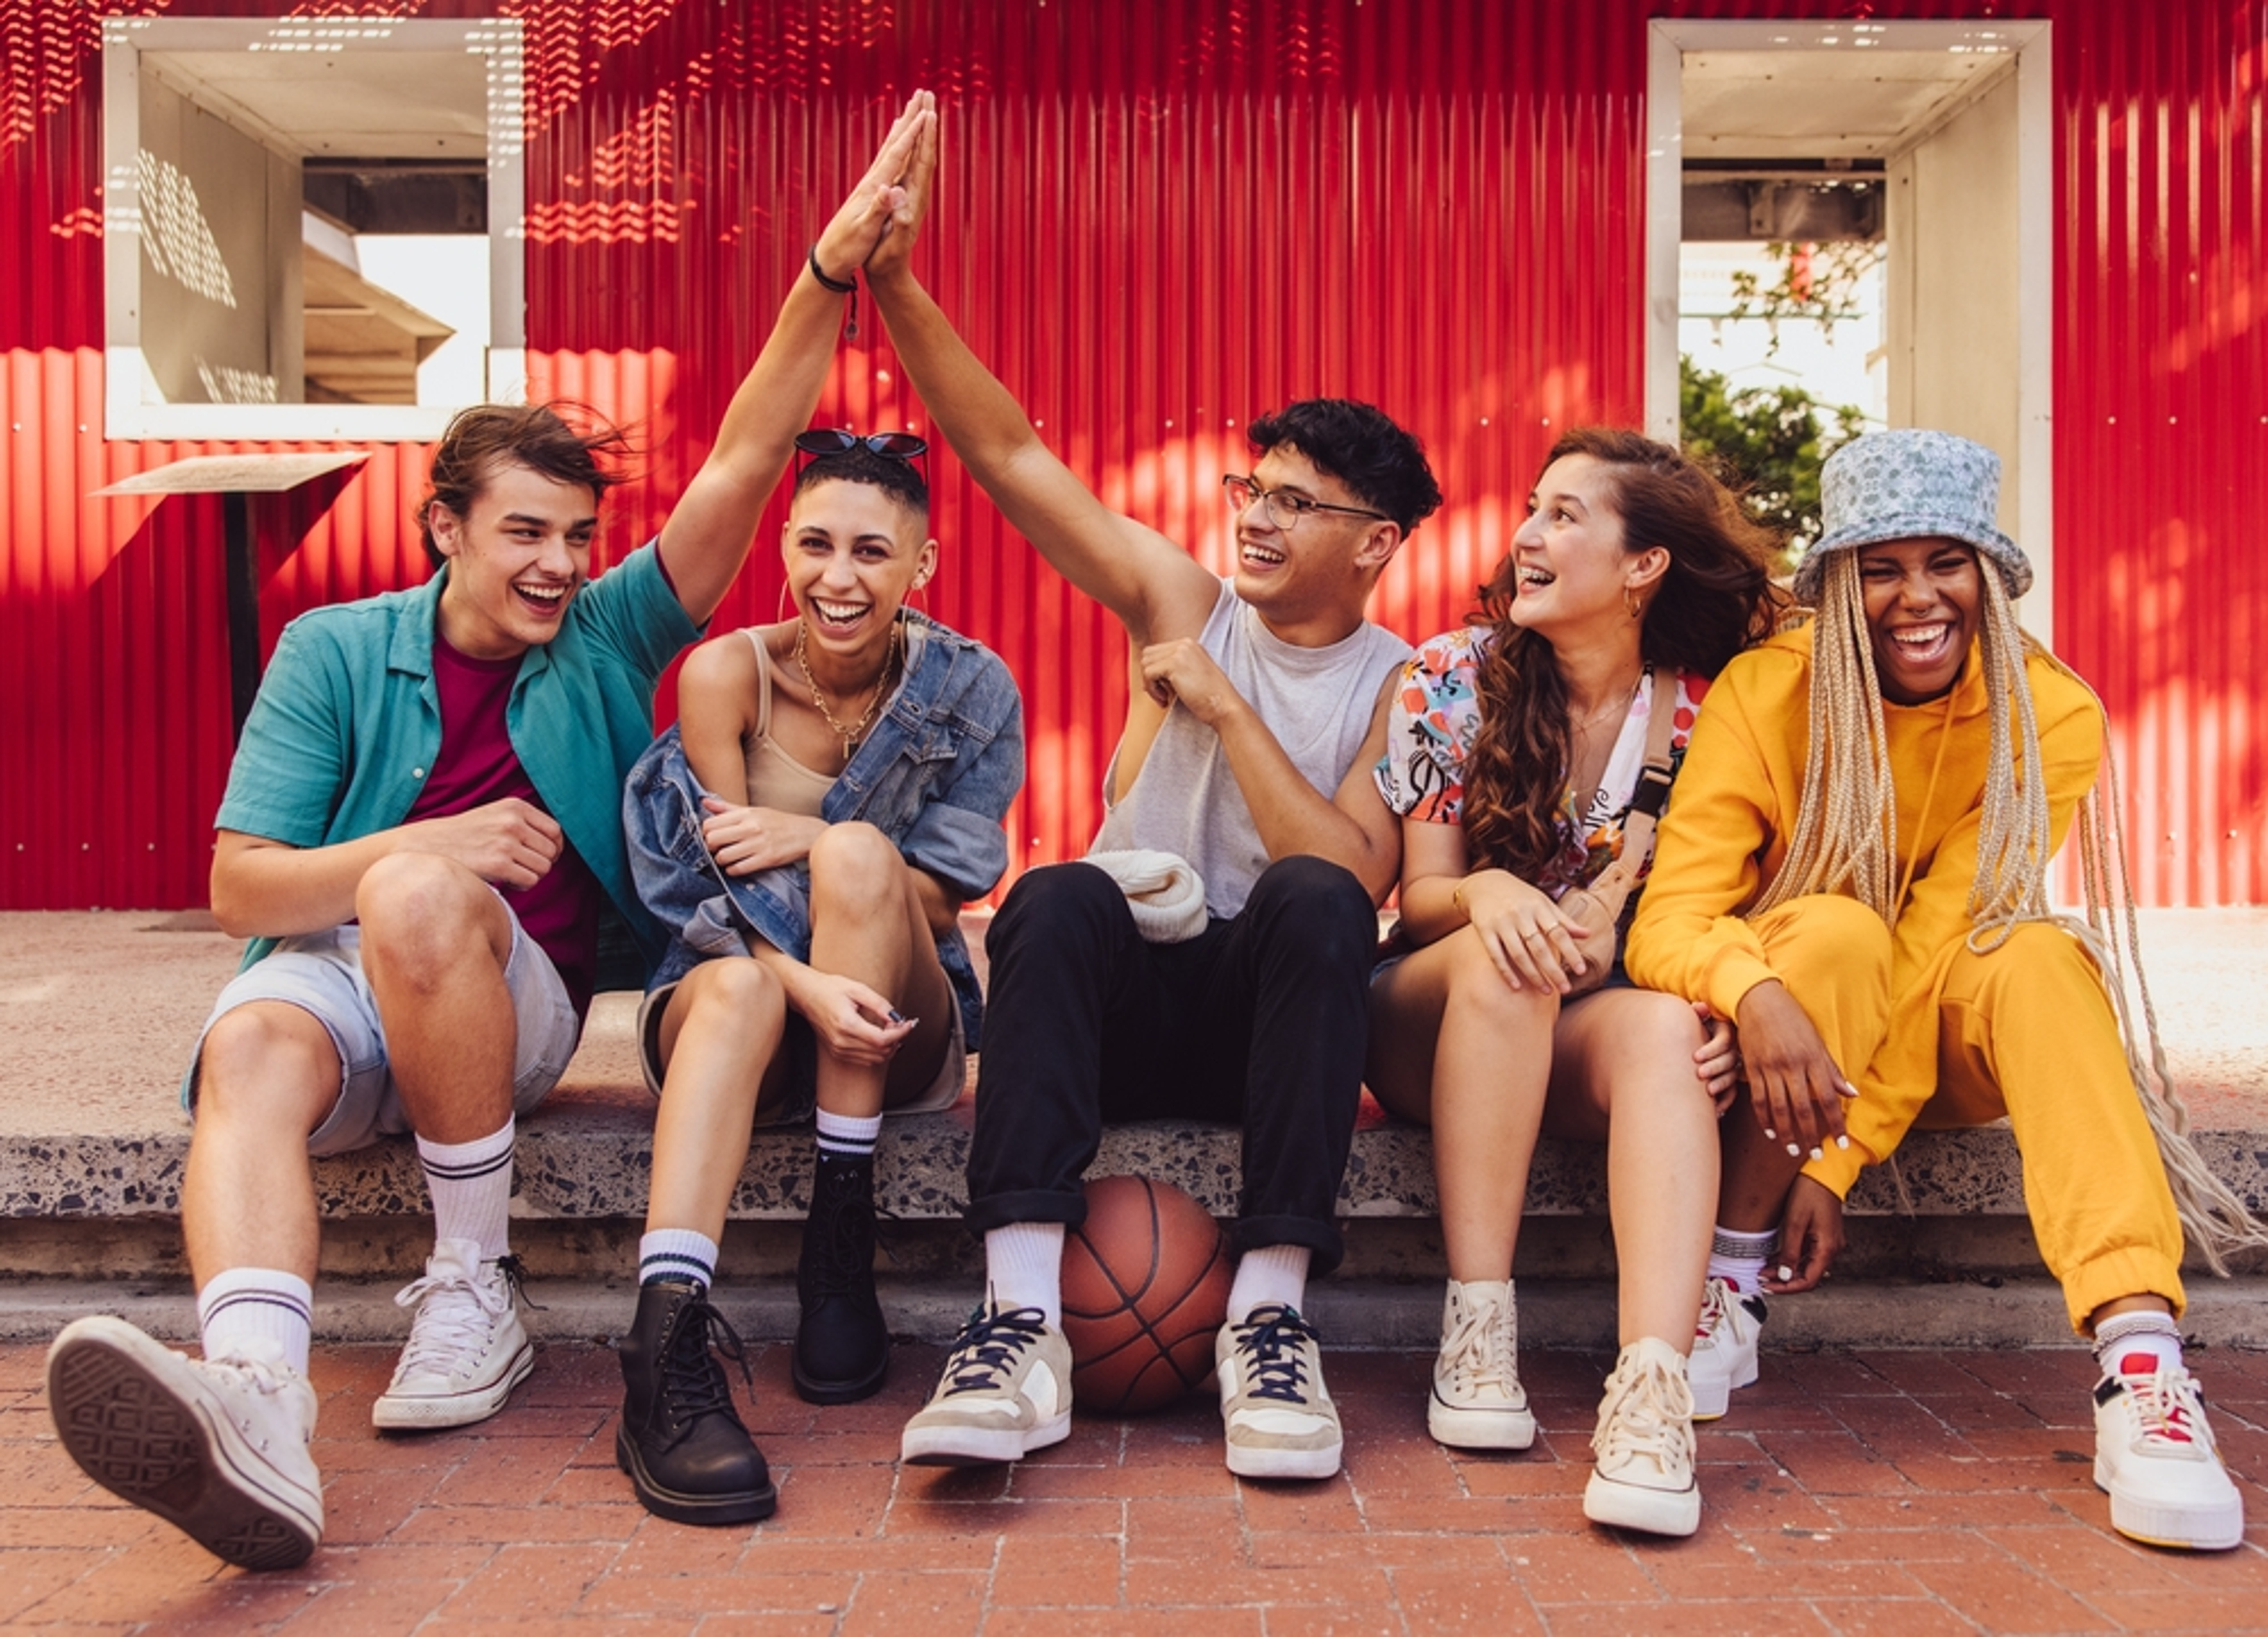 Sensibull Co-Founder Lauds Gen Z For Putting Happiness Before Money